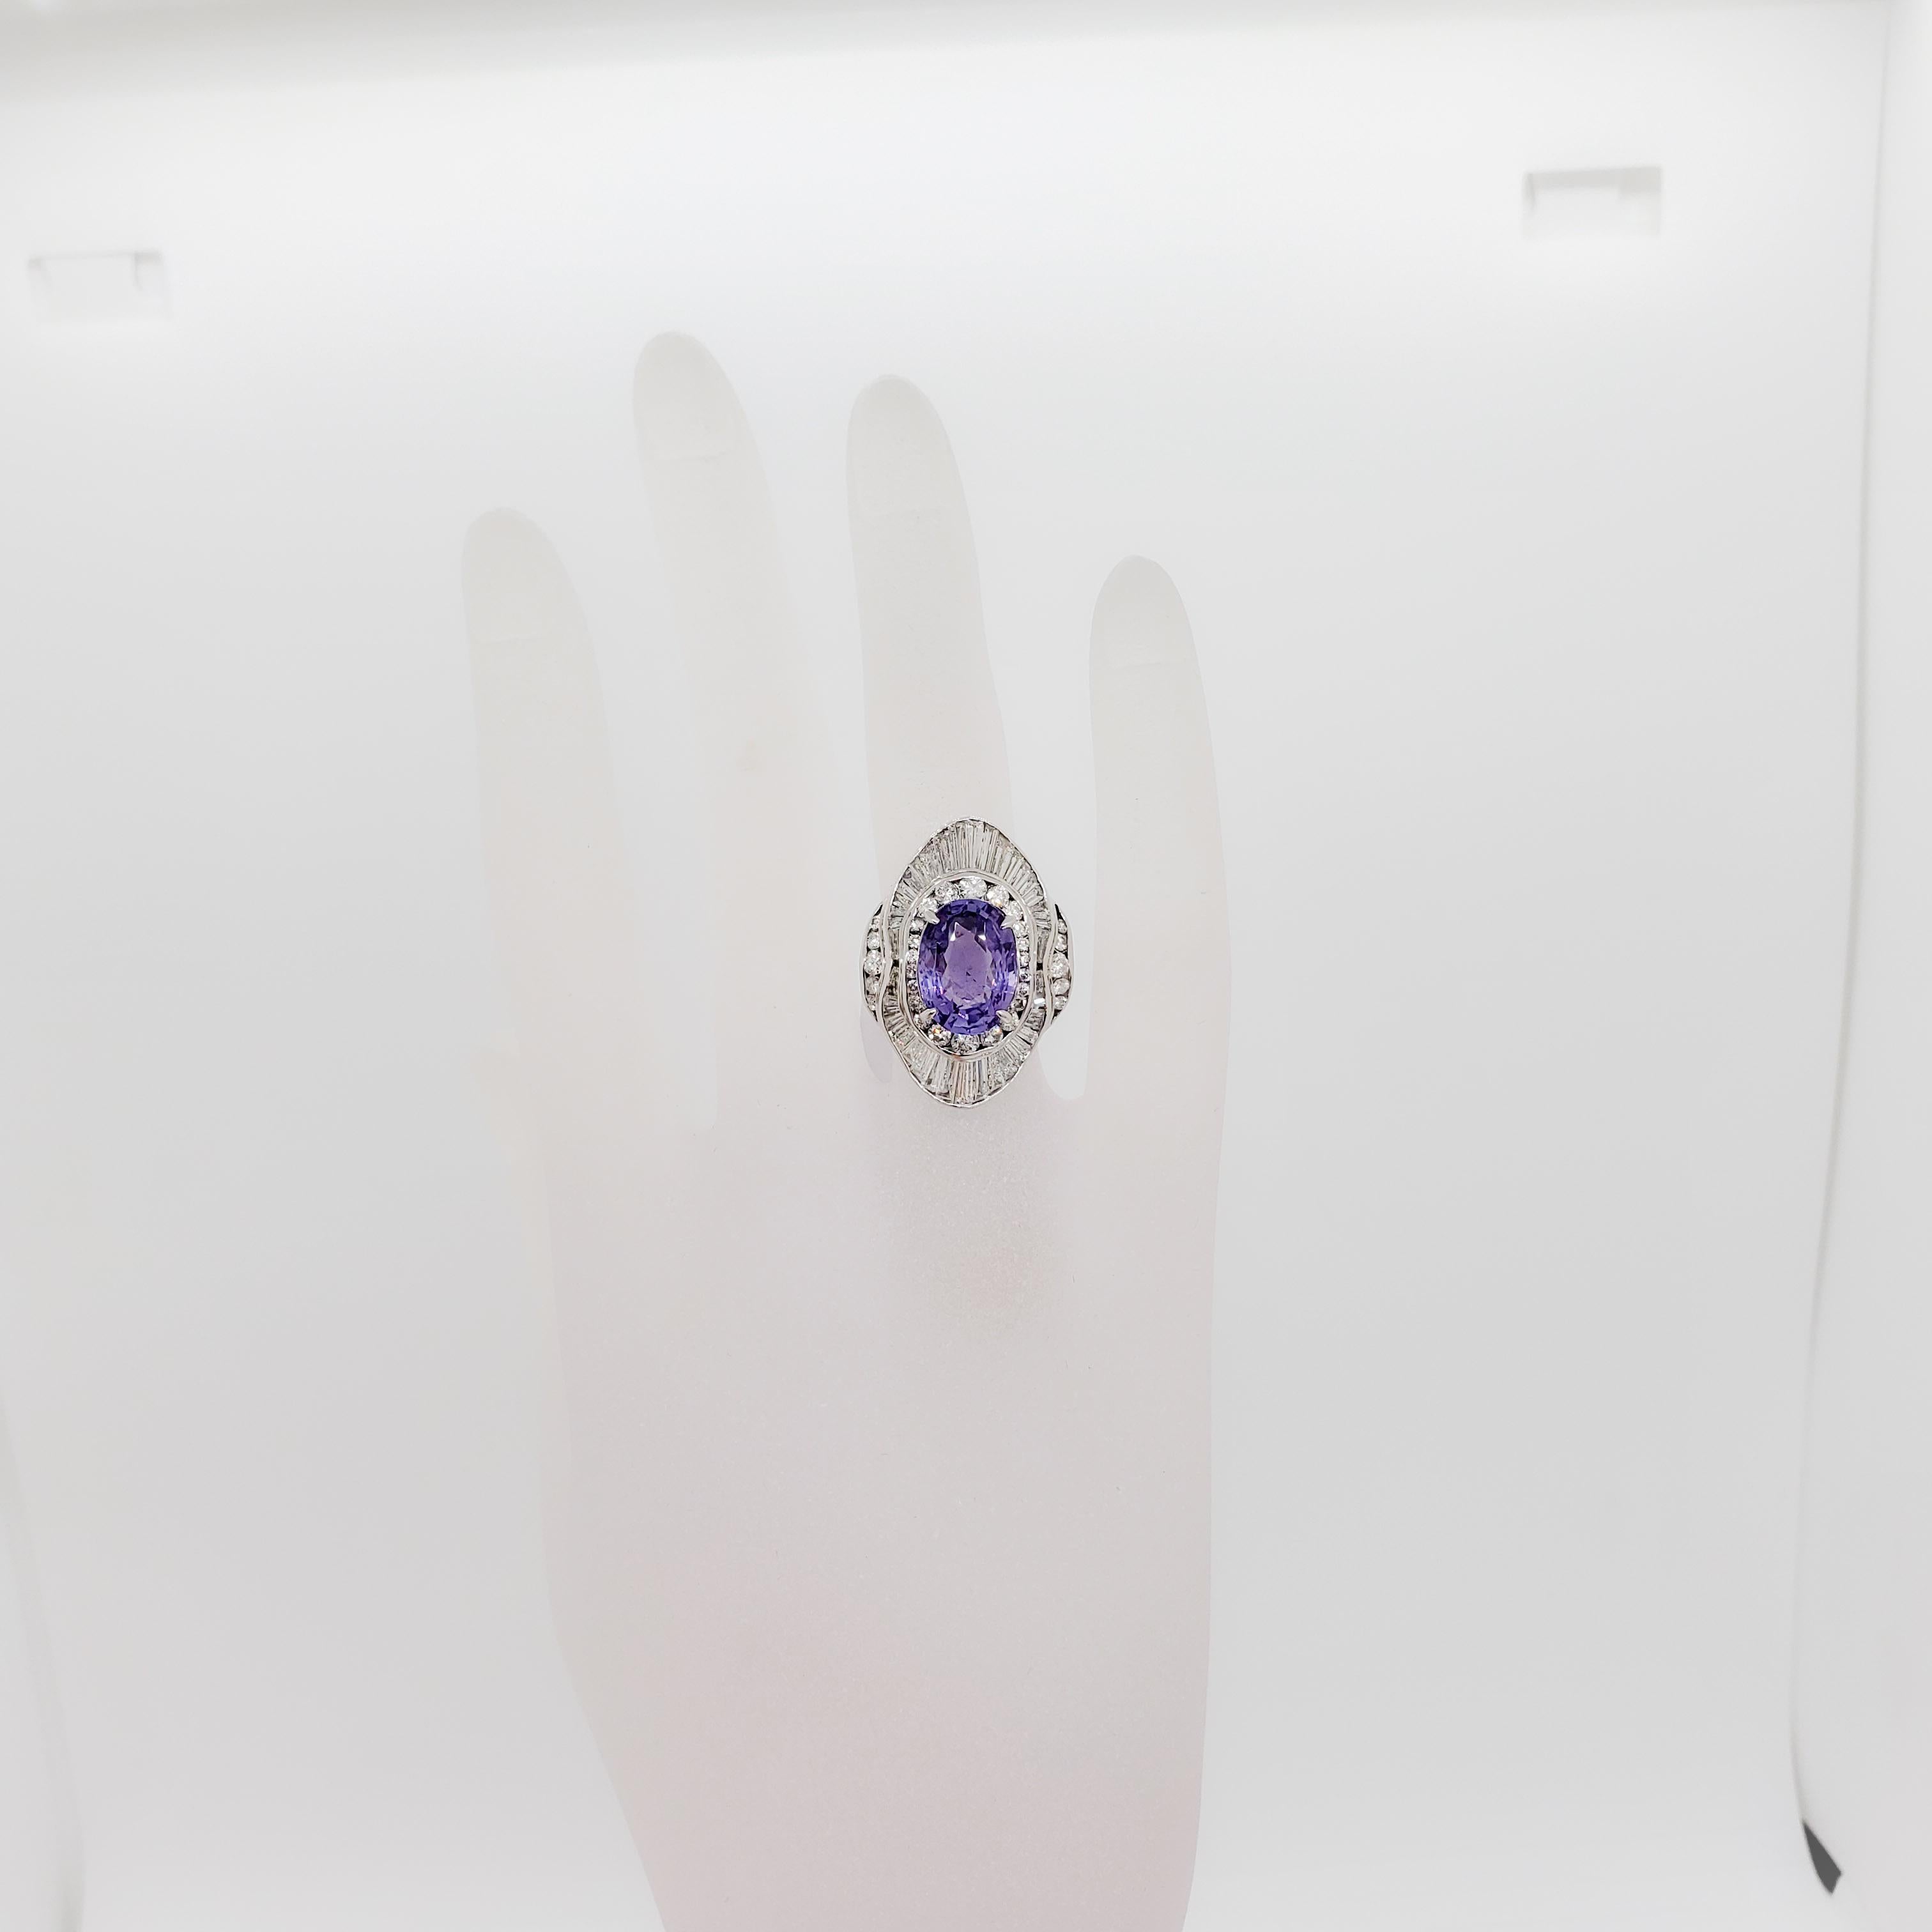 Gorgeous 5.15 ct. Sri Lanka purple Ceylon sapphire modified brilliant oval with 2.28 ct. good quality white diamond rounds and baguettes.  Handcrafted platinum mounting. GIA certificate included.  Purple sapphire is no heat.  Ring size 6.